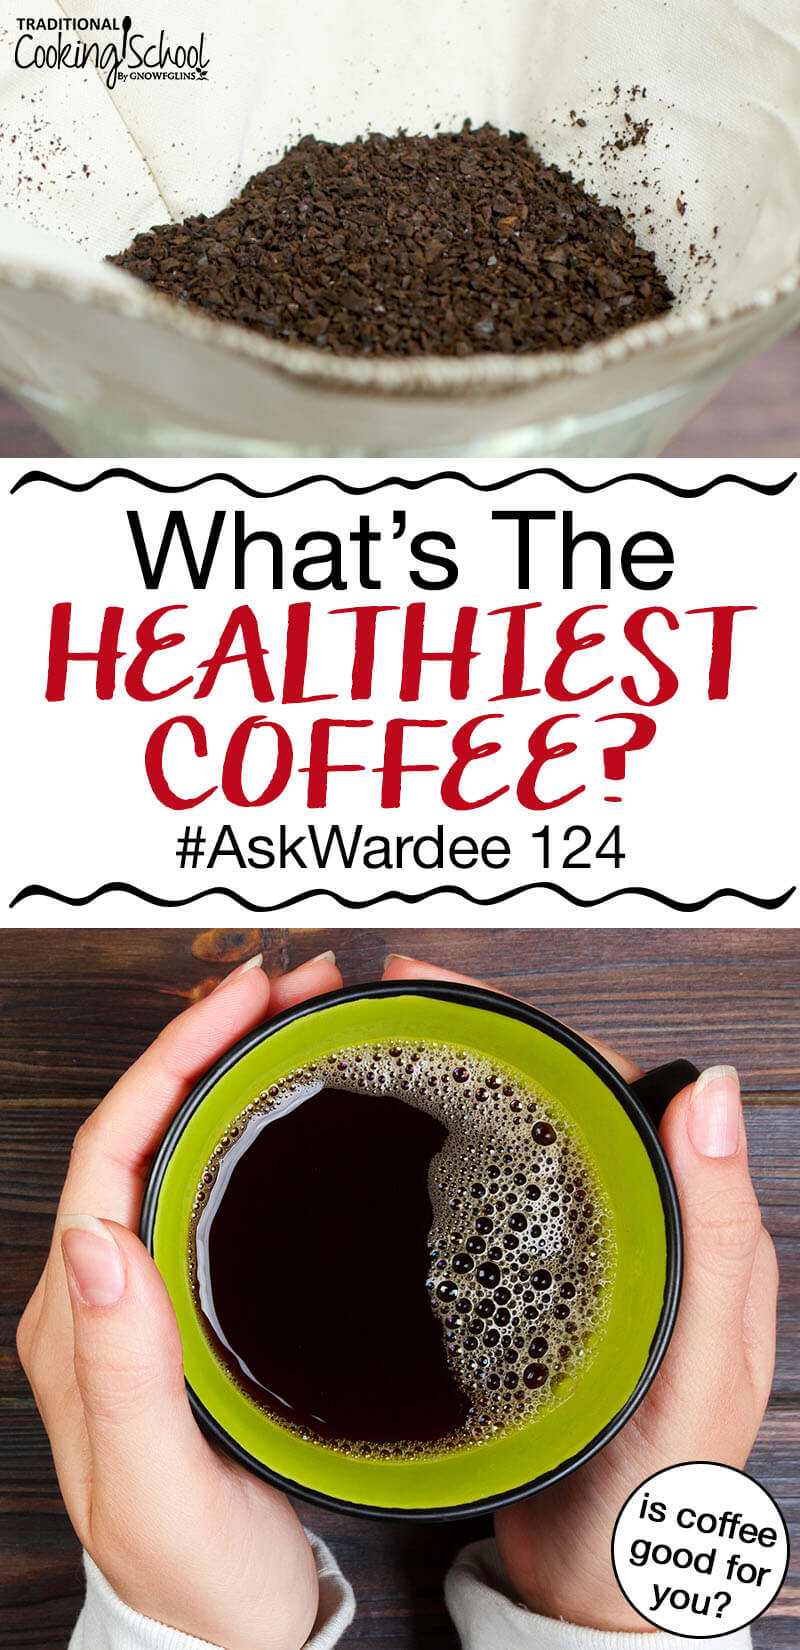 photo collage of making coffee, including grounds in a coffee filter and a mug of black coffee, with text overlay: "What's The Healthiest Coffee? #AskWardee 124 (Is Coffee Good For You?)"